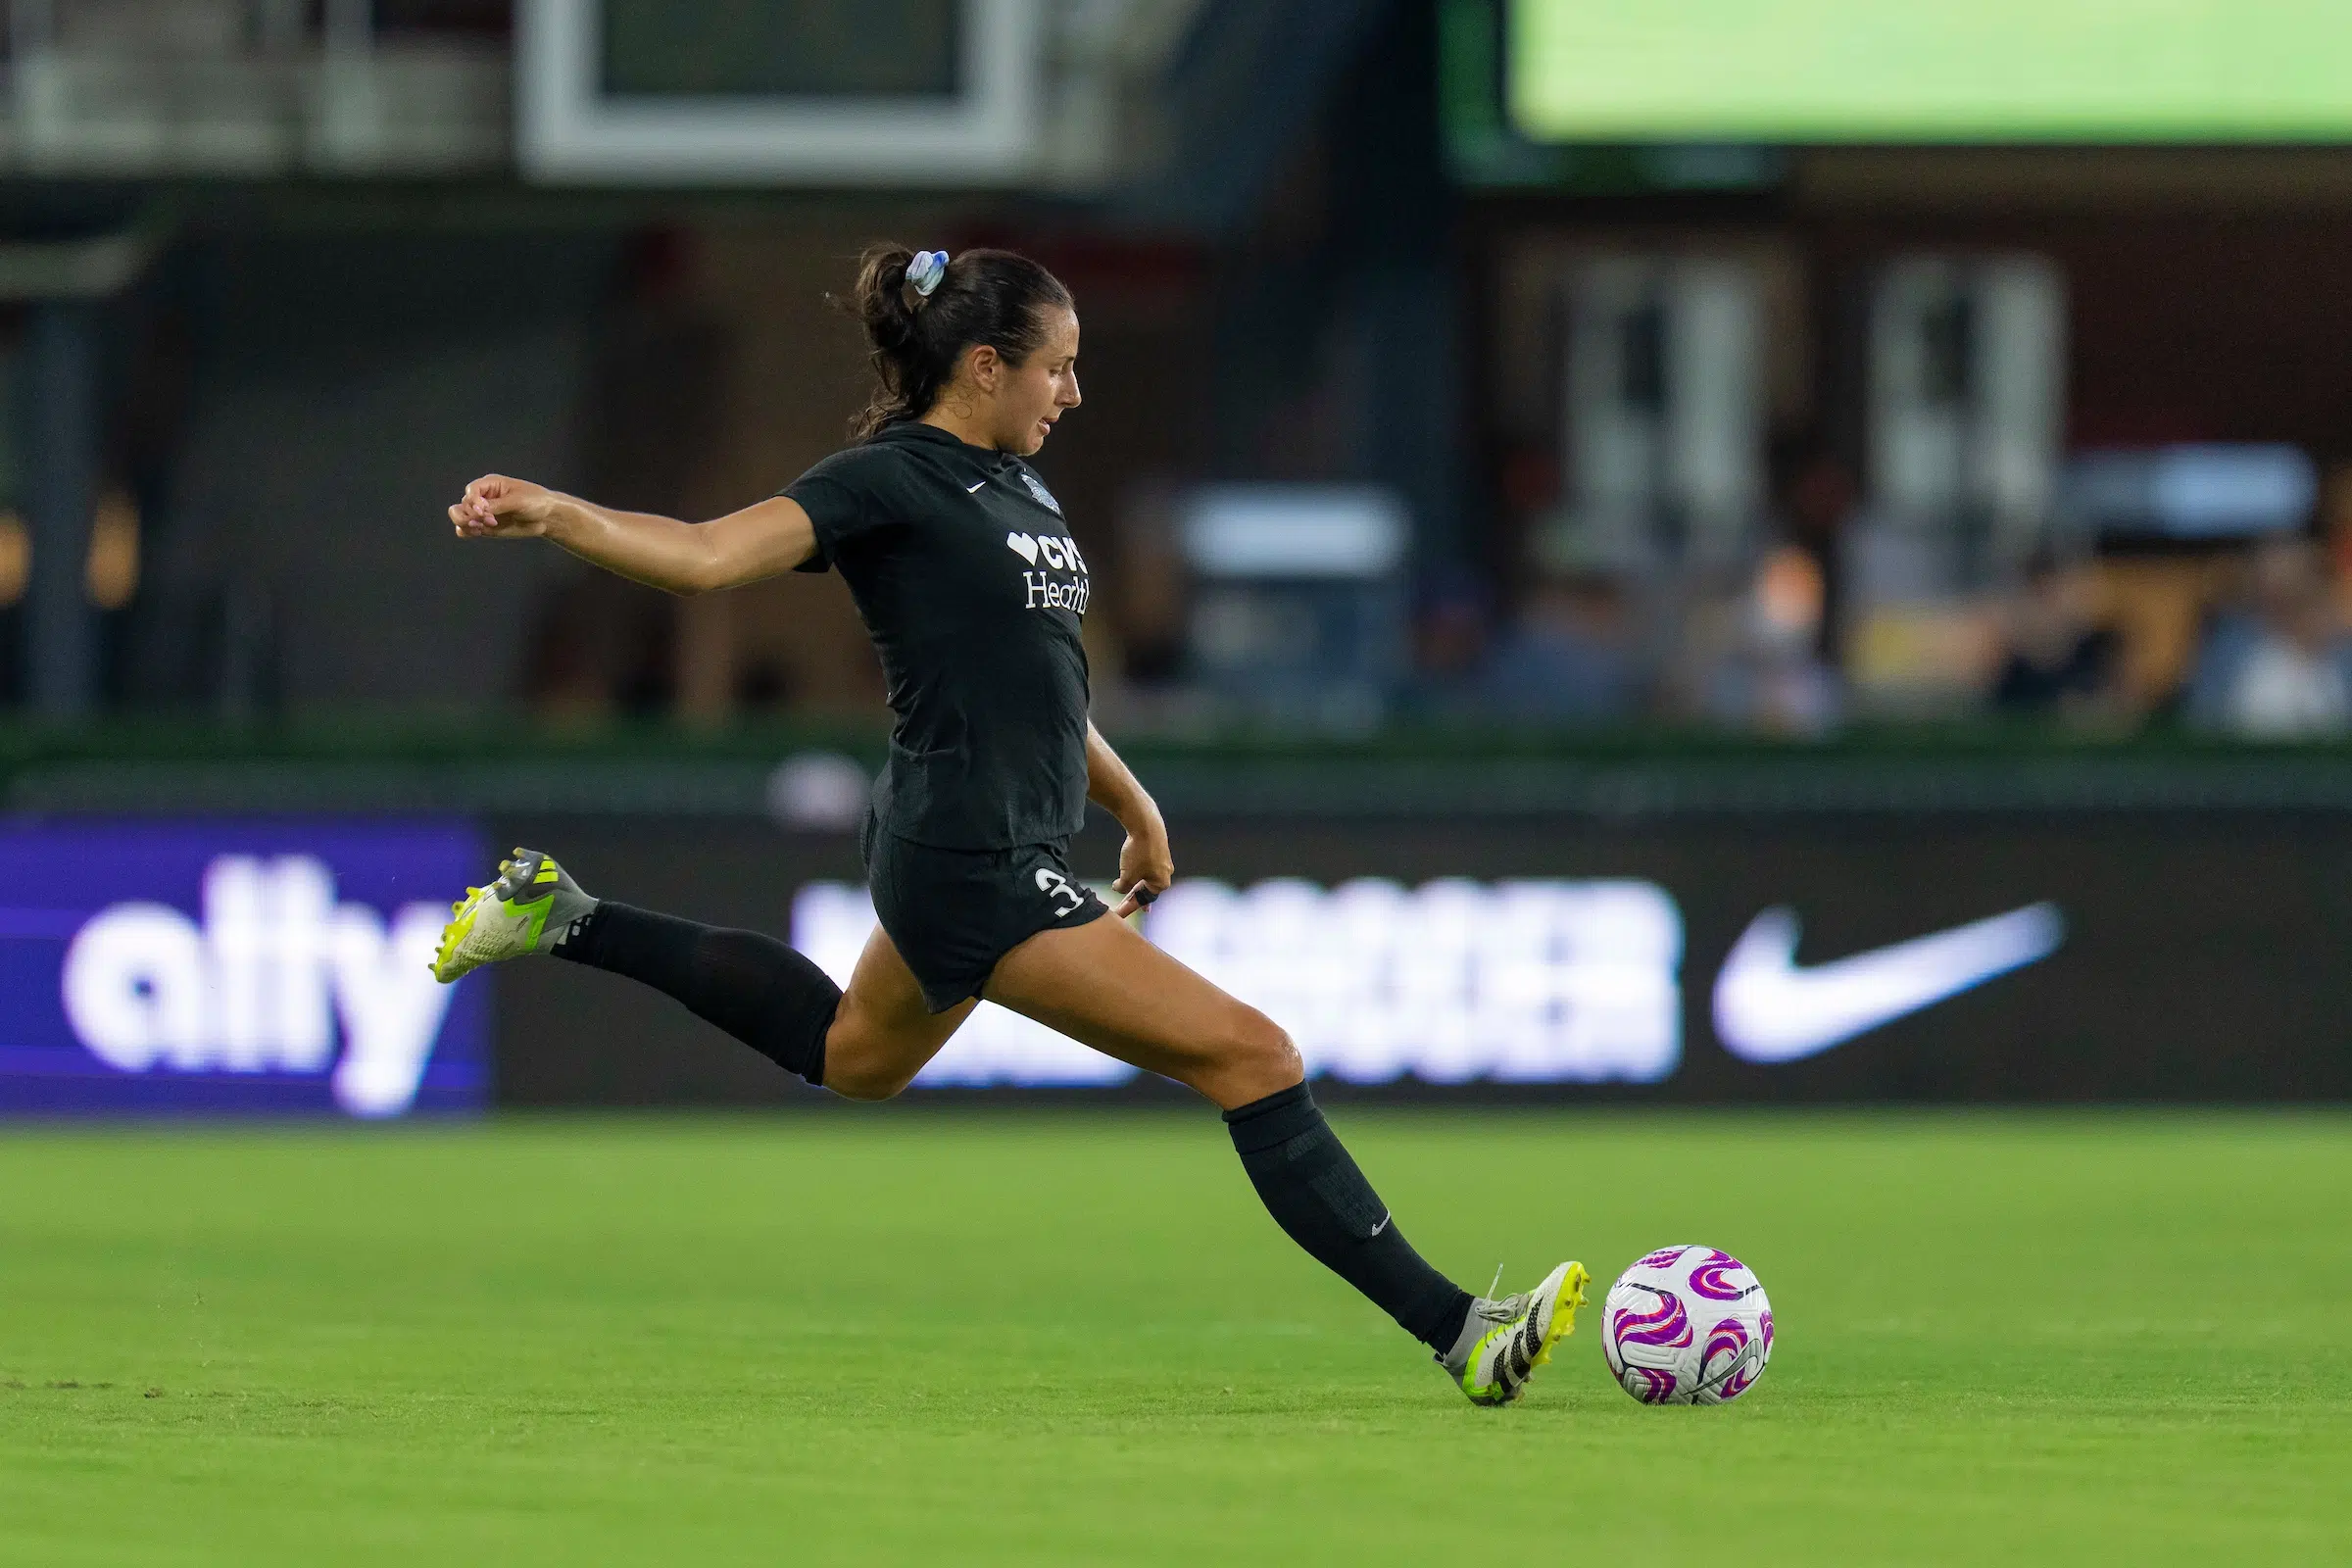 Sam Staab in an all black uniform with her hair in a pony tail with a scrunchie, winds up to kick a soccer ball on a green field.